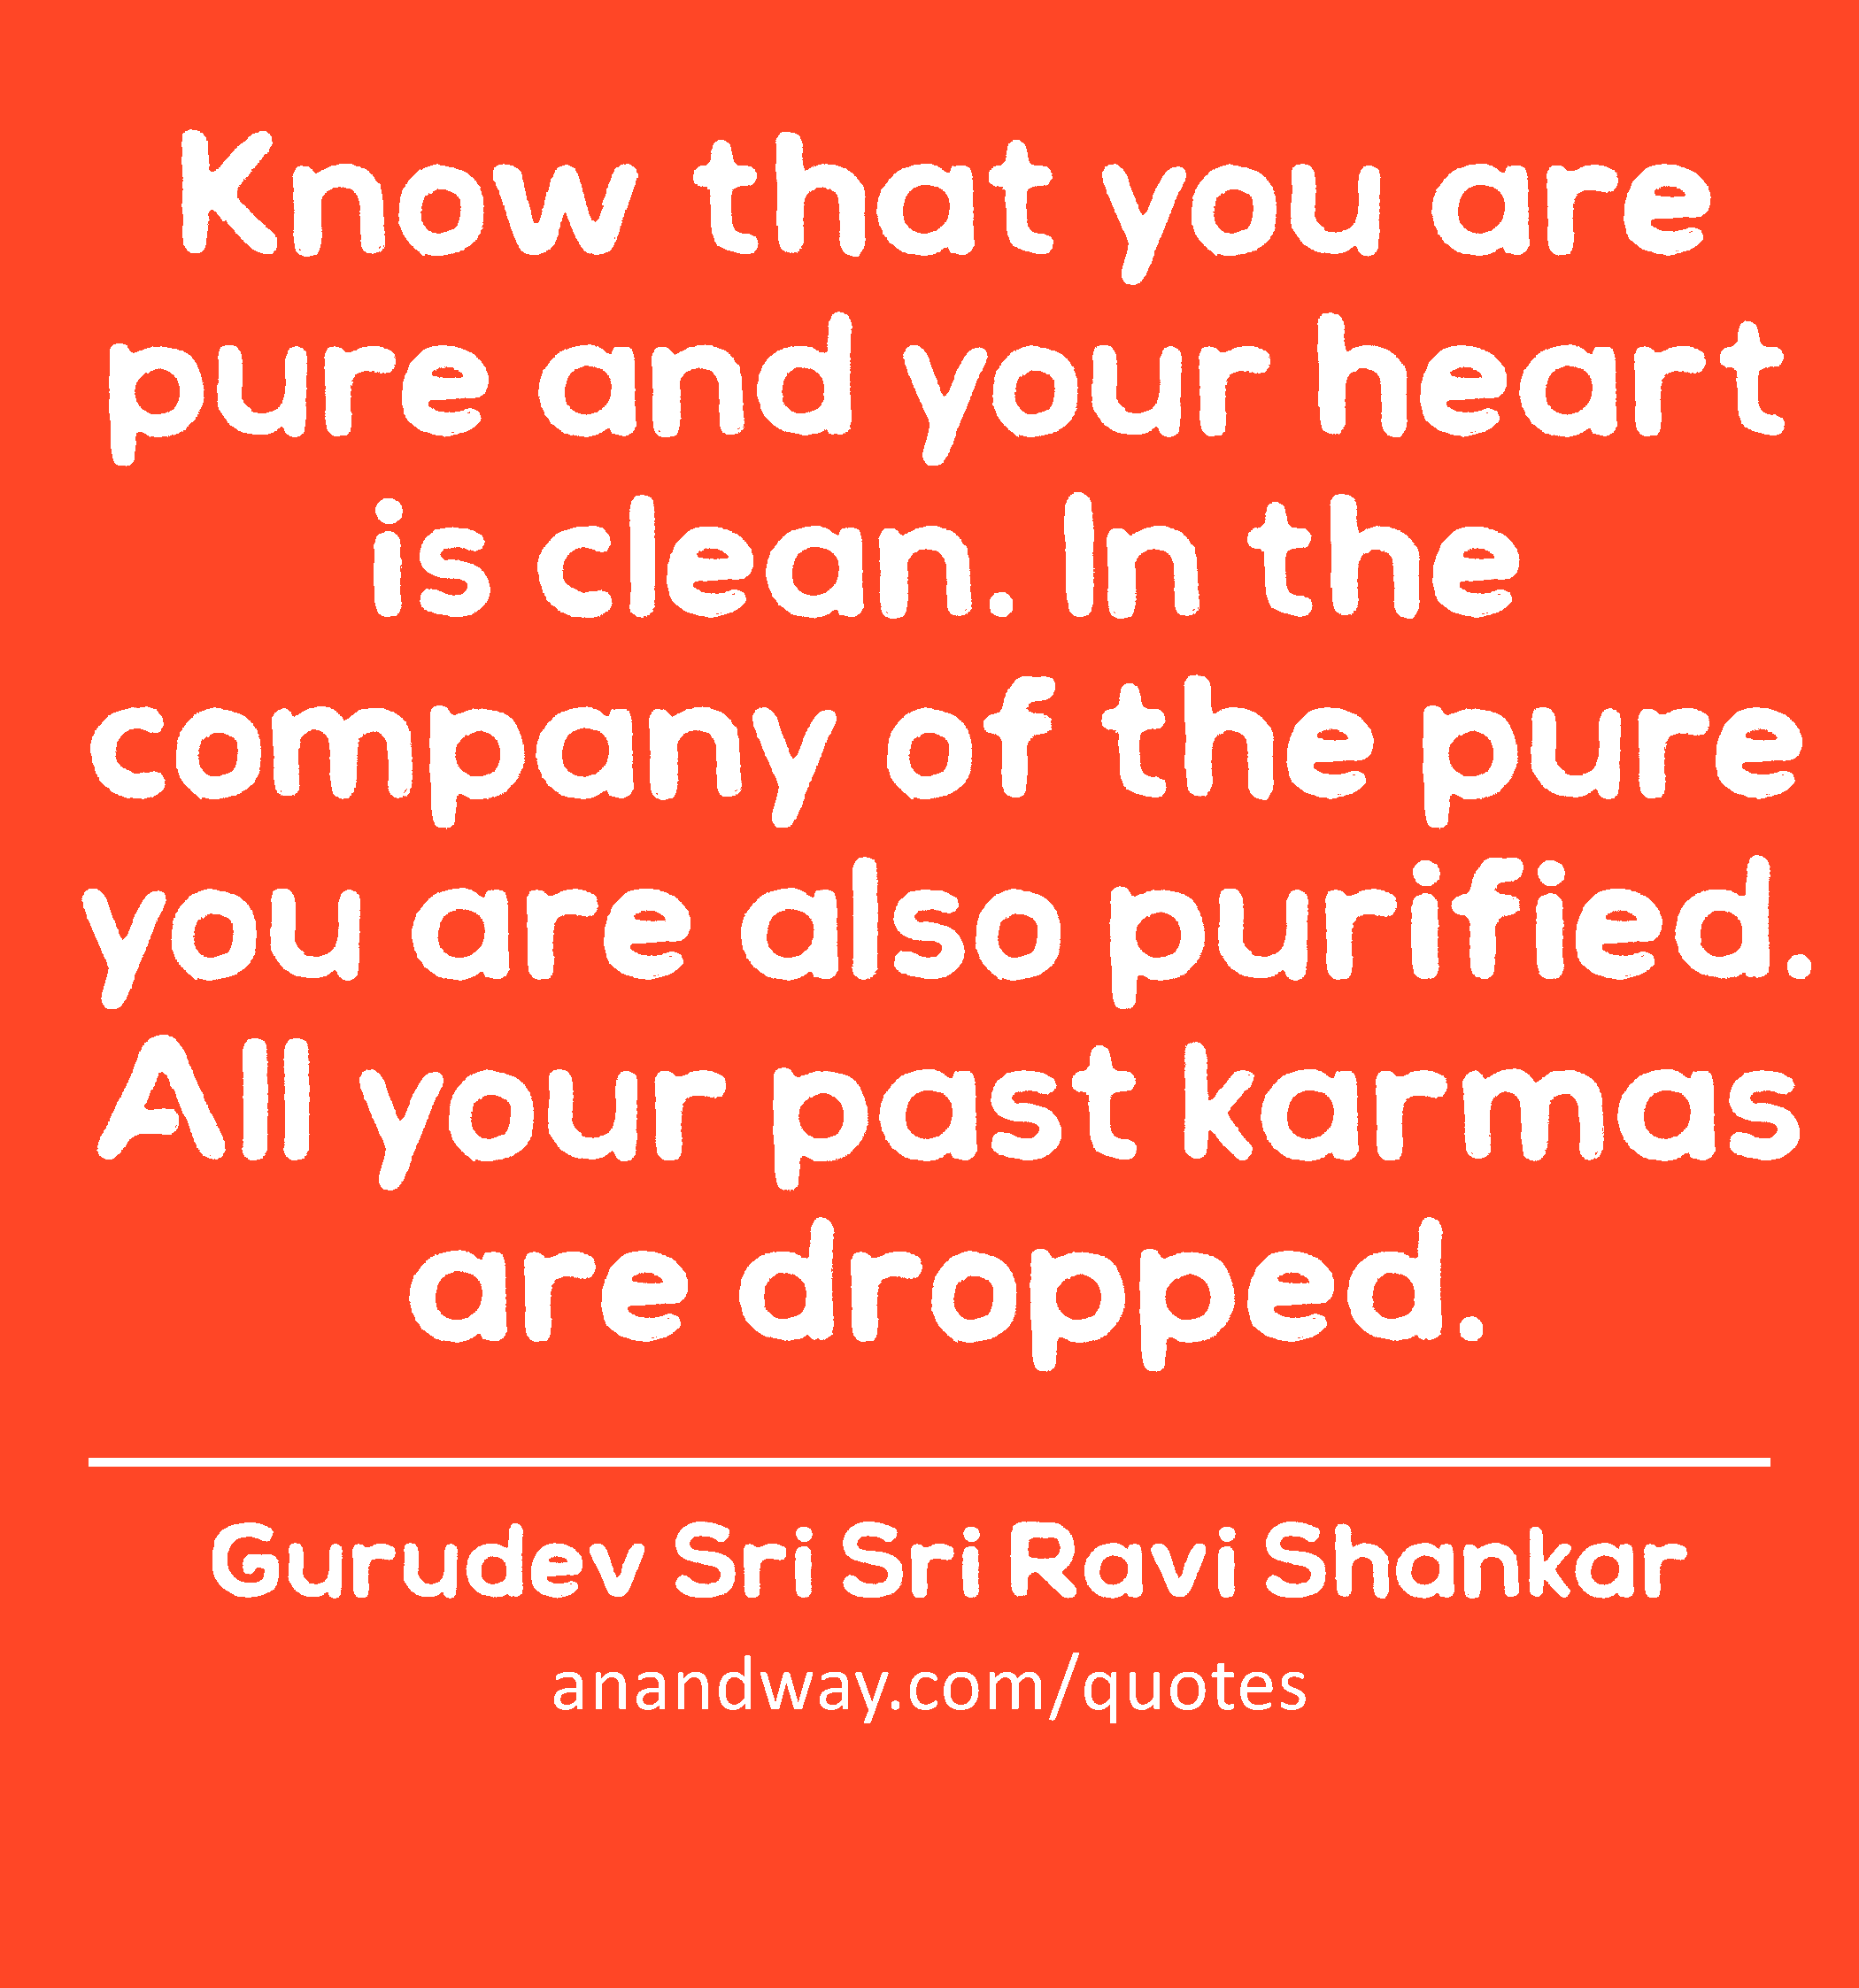 Know that you are pure and your heart is clean. In the company of the pure you are also purified.
 -Gurudev Sri Sri Ravi Shankar